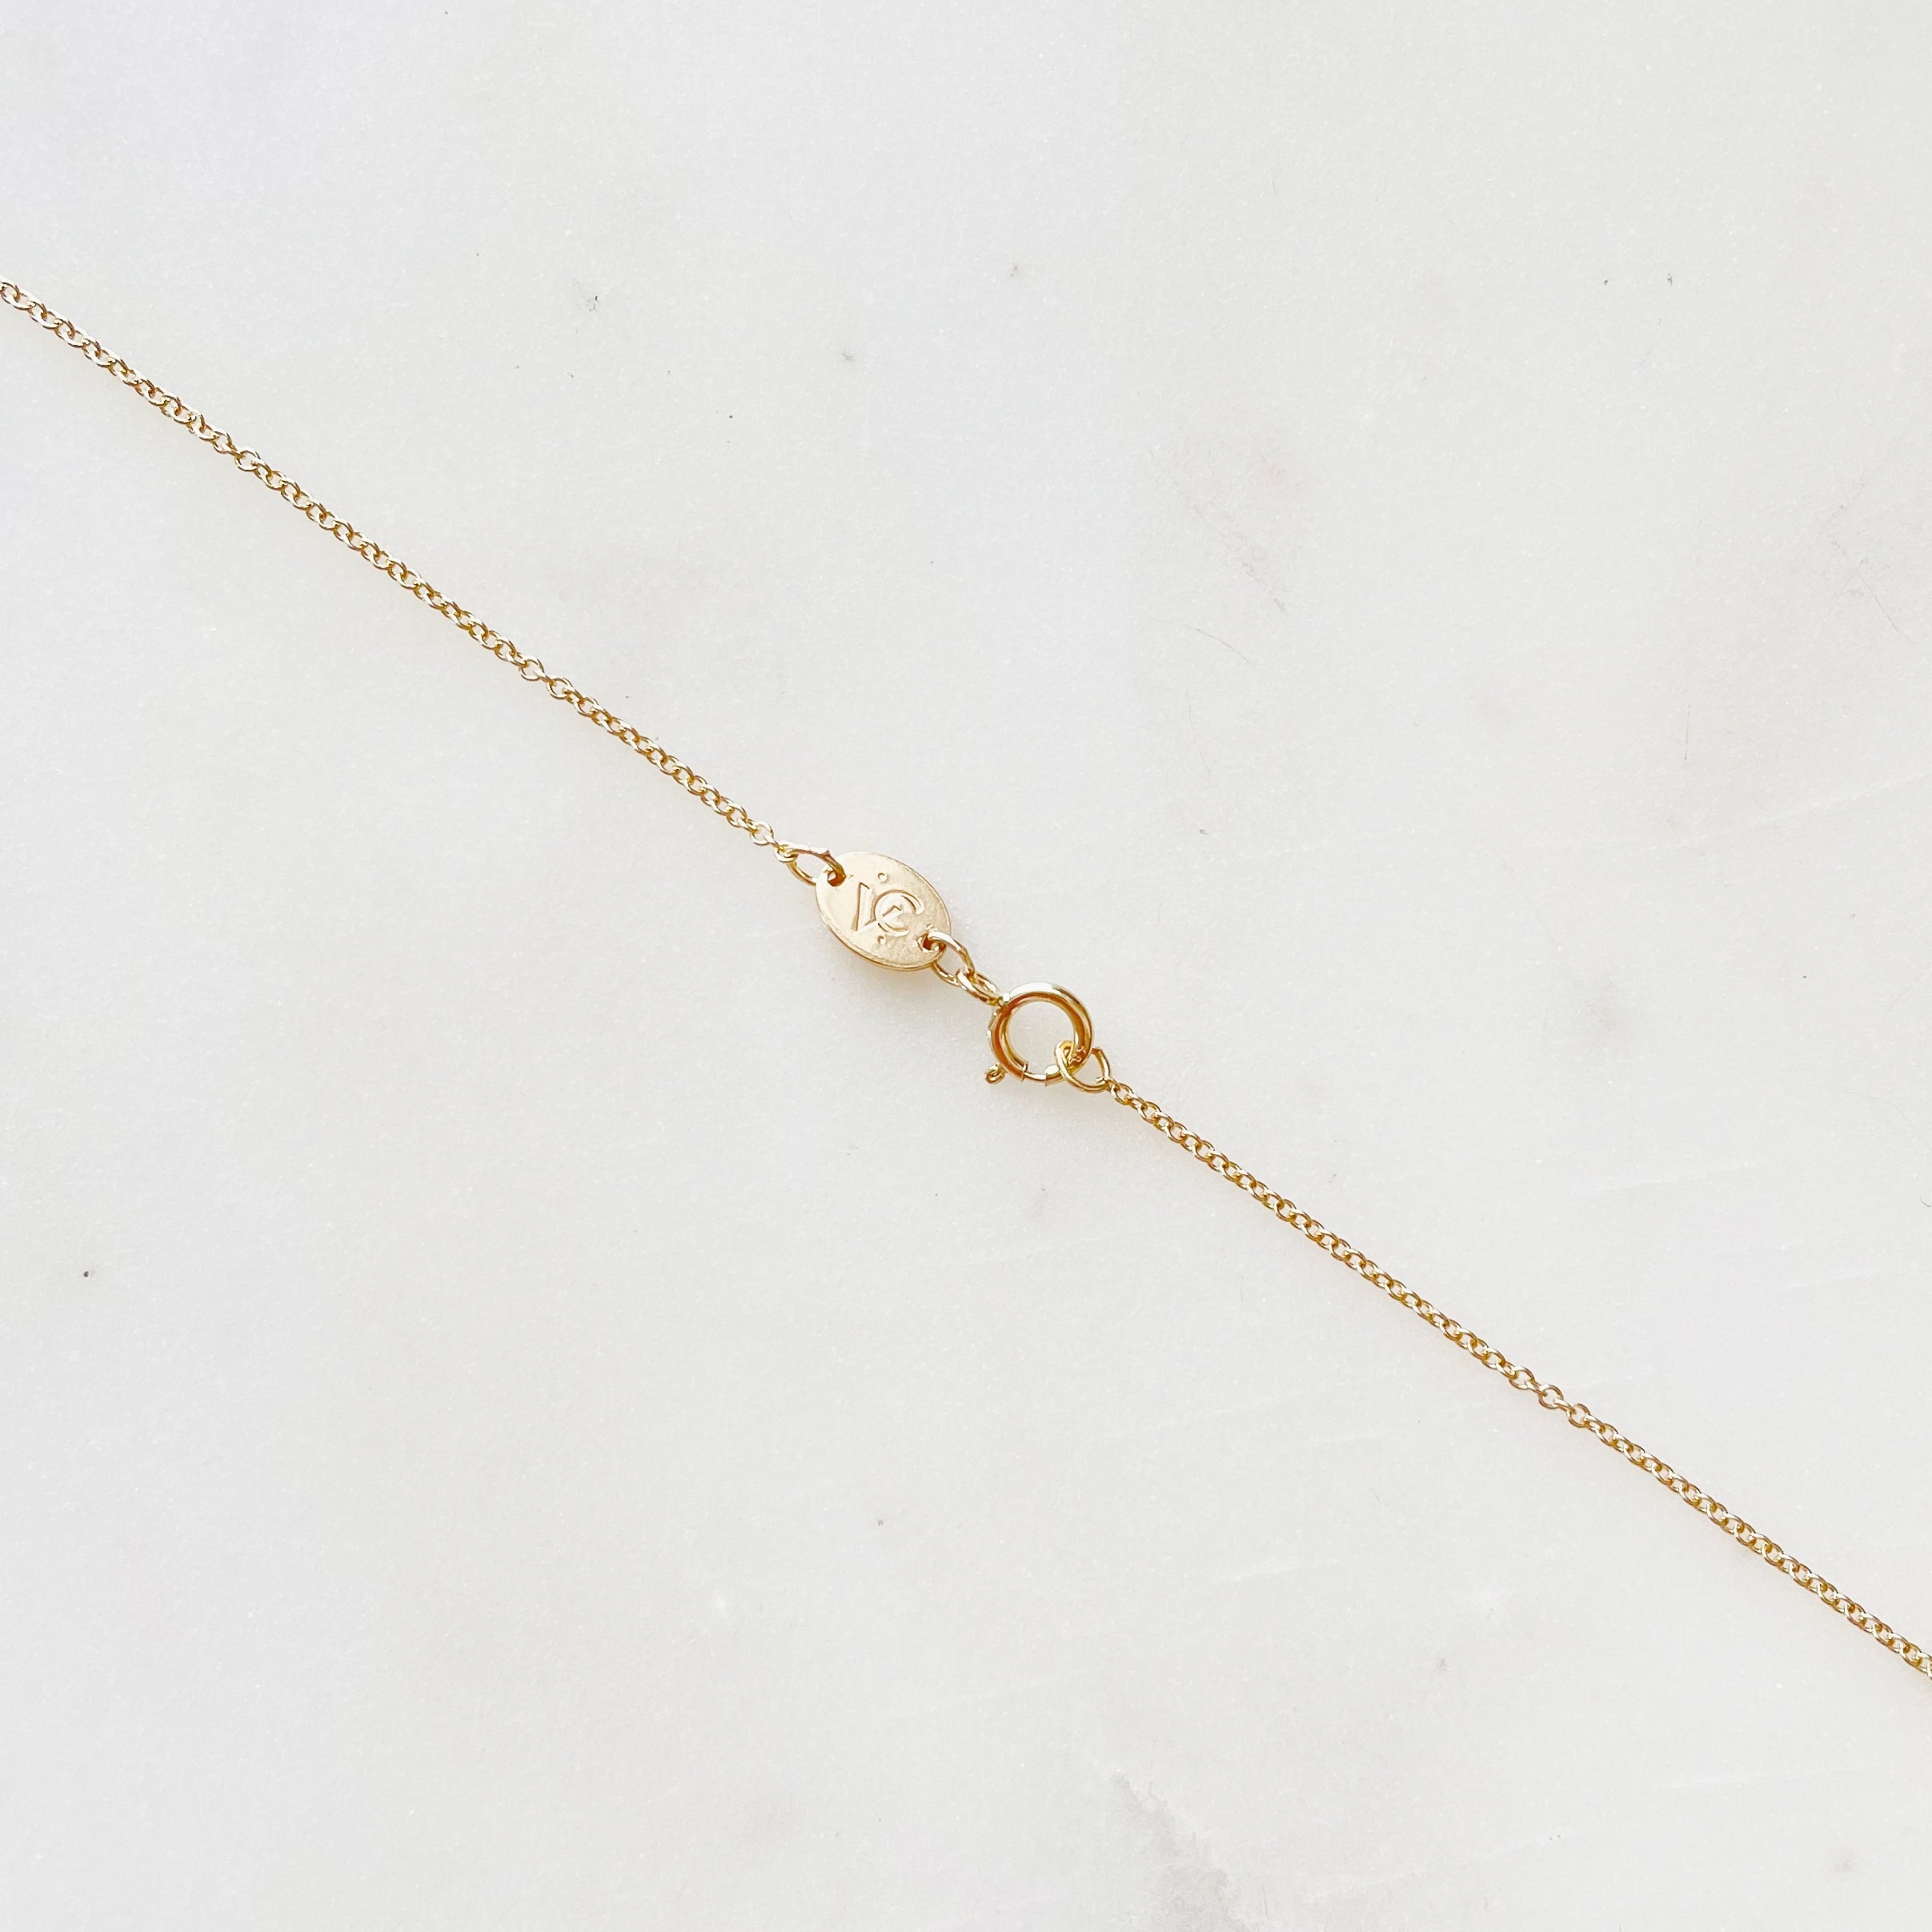 The Classic Dainty Chain - Sterling Silver & Gold Filled